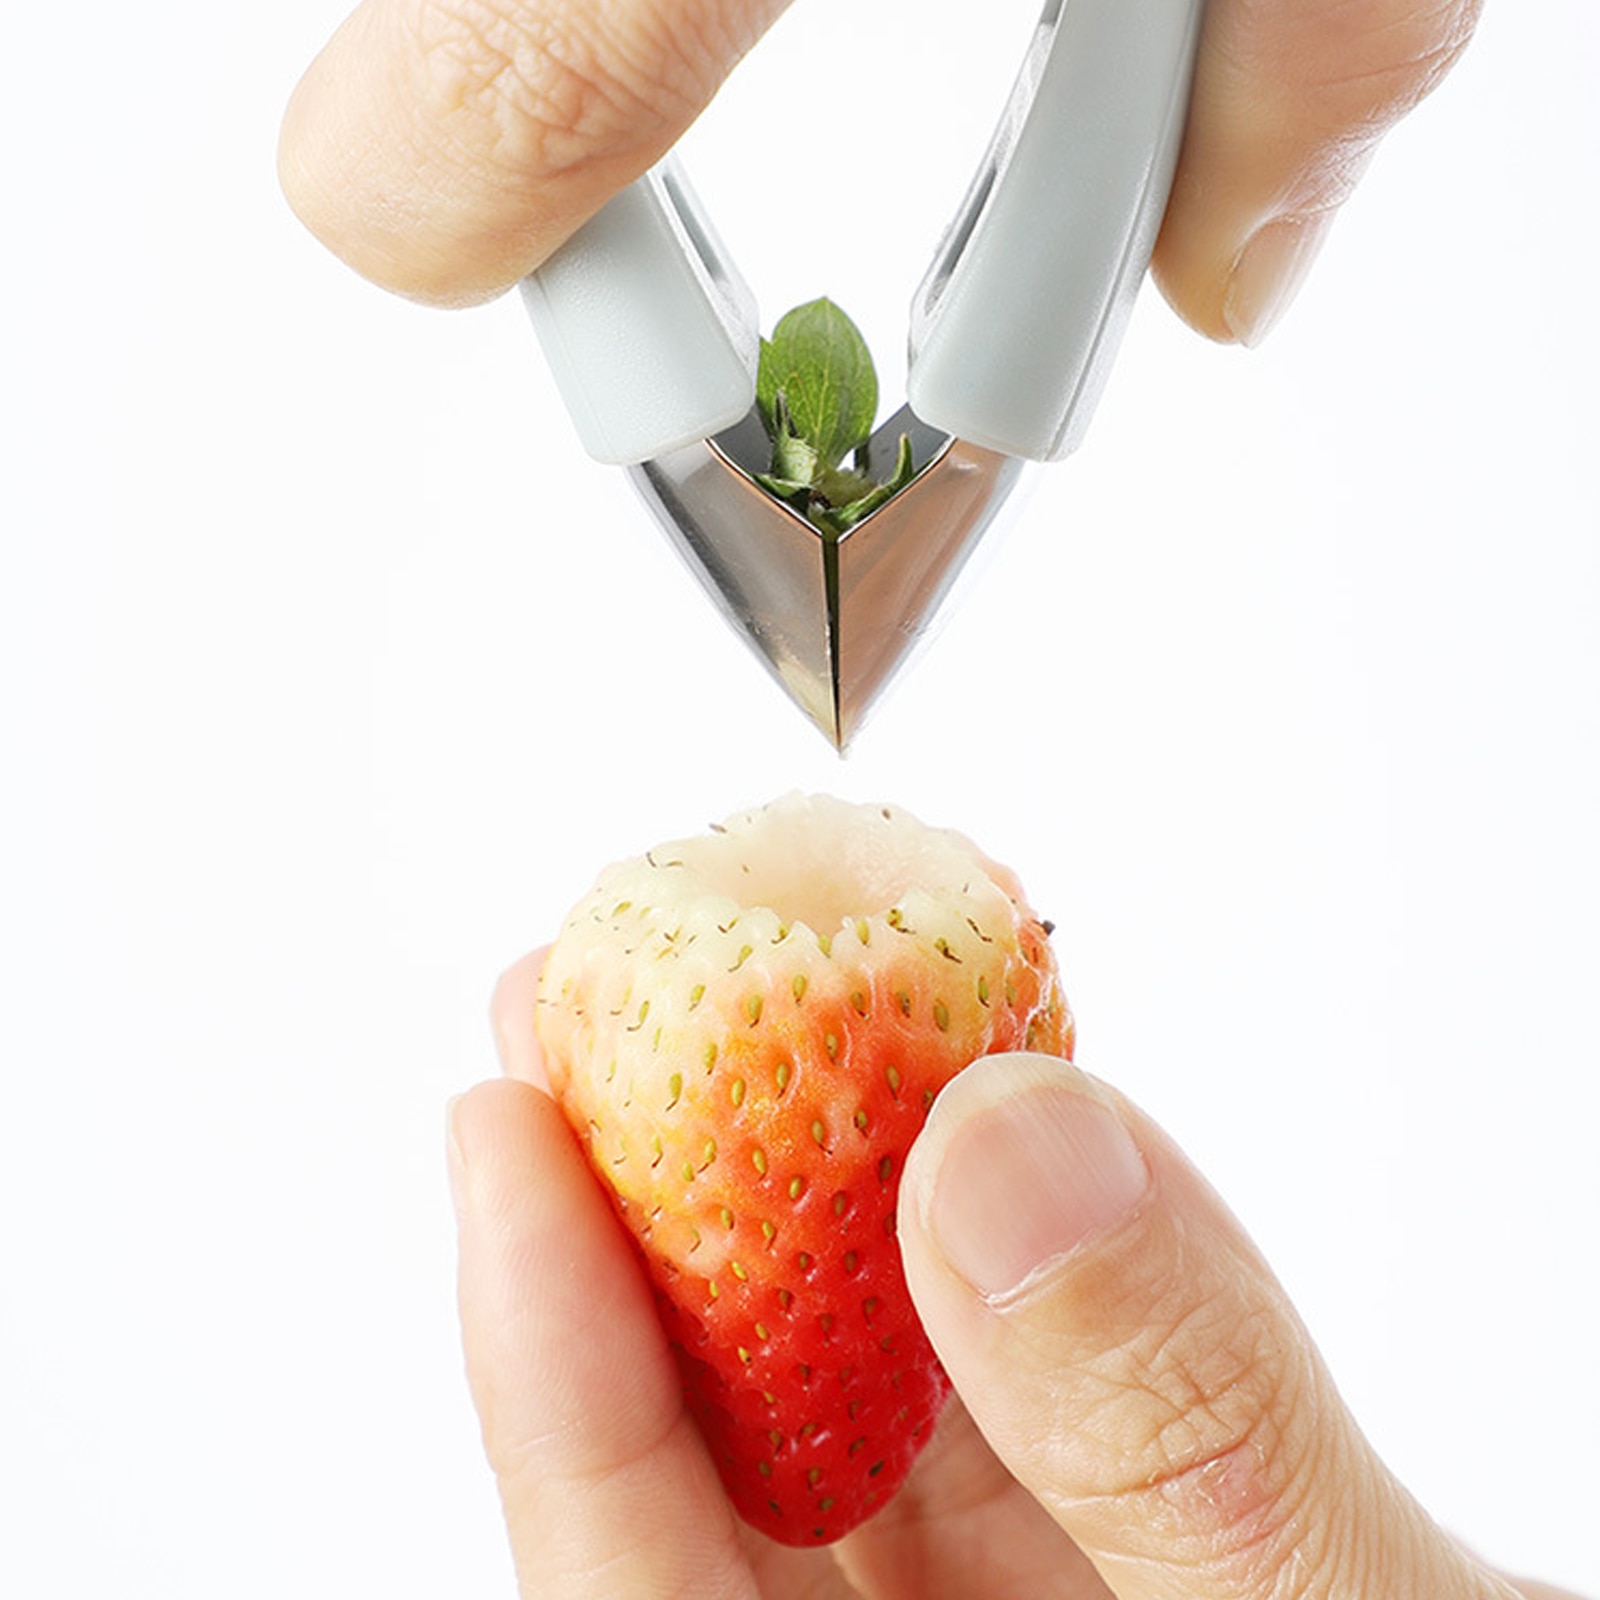 Stainless Steel Strawberry Pineapple Peeler Fruit And Vegetable Practical Seed Clip Fruit Tool Kitchen Gadget